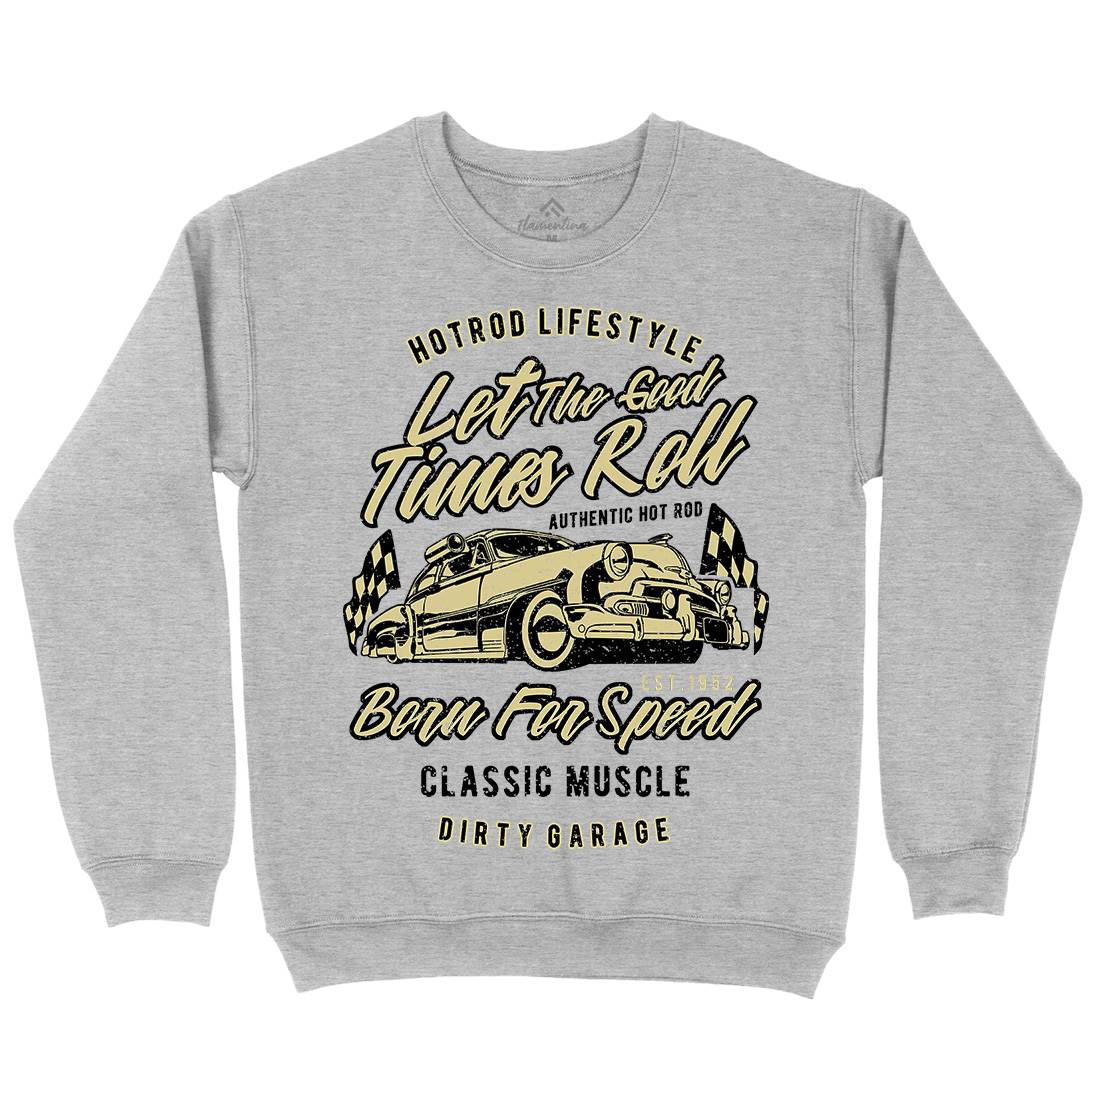 Let The Good Times Roll Mens Crew Neck Sweatshirt Cars A705